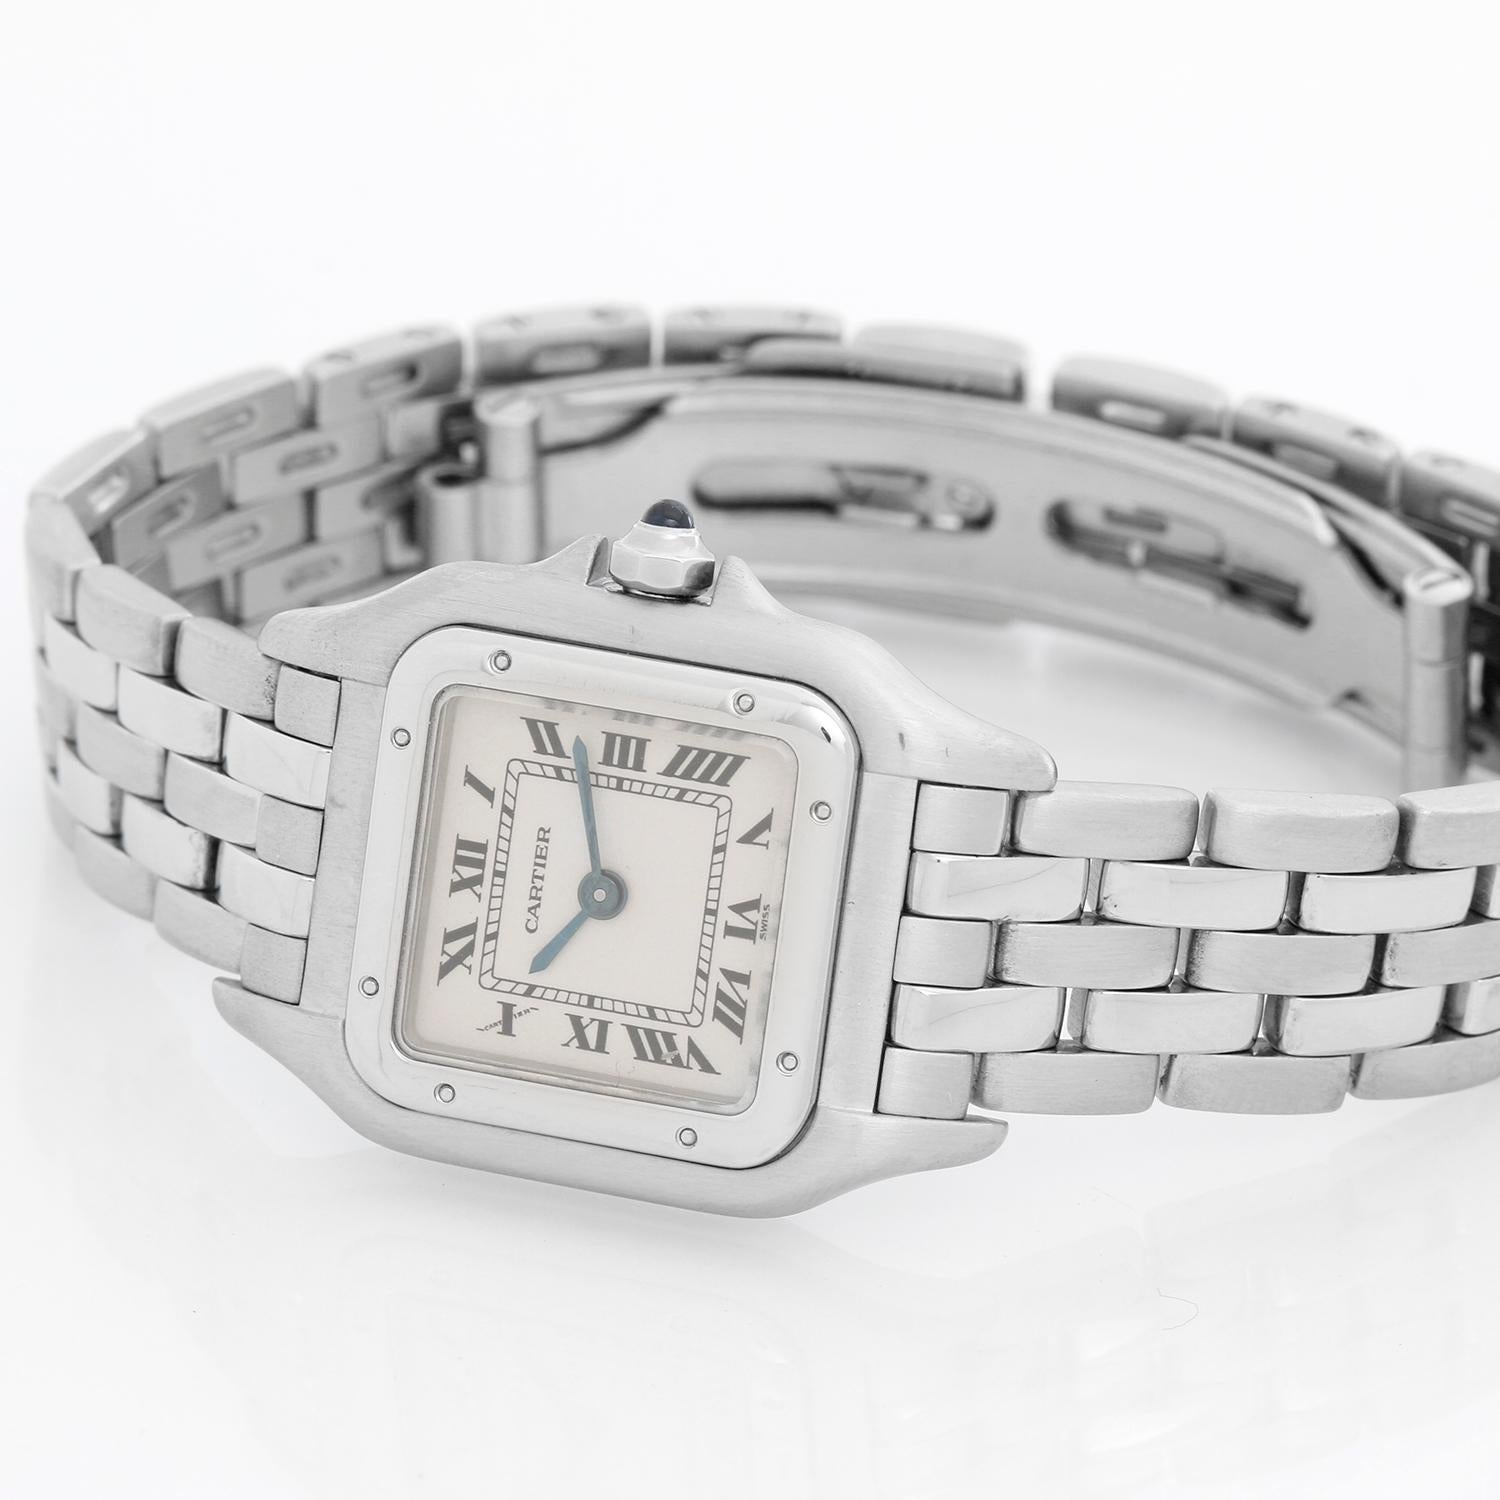 Cartier Panther Ladies Stainless Steel Panthere Watch W25033P5 - Quartz. Stainless steel case (21mm x 30mm). Ivory colored dial with black Roman numerals.  Stainless steel Panthere bracelet. Pre-owned with custom box .